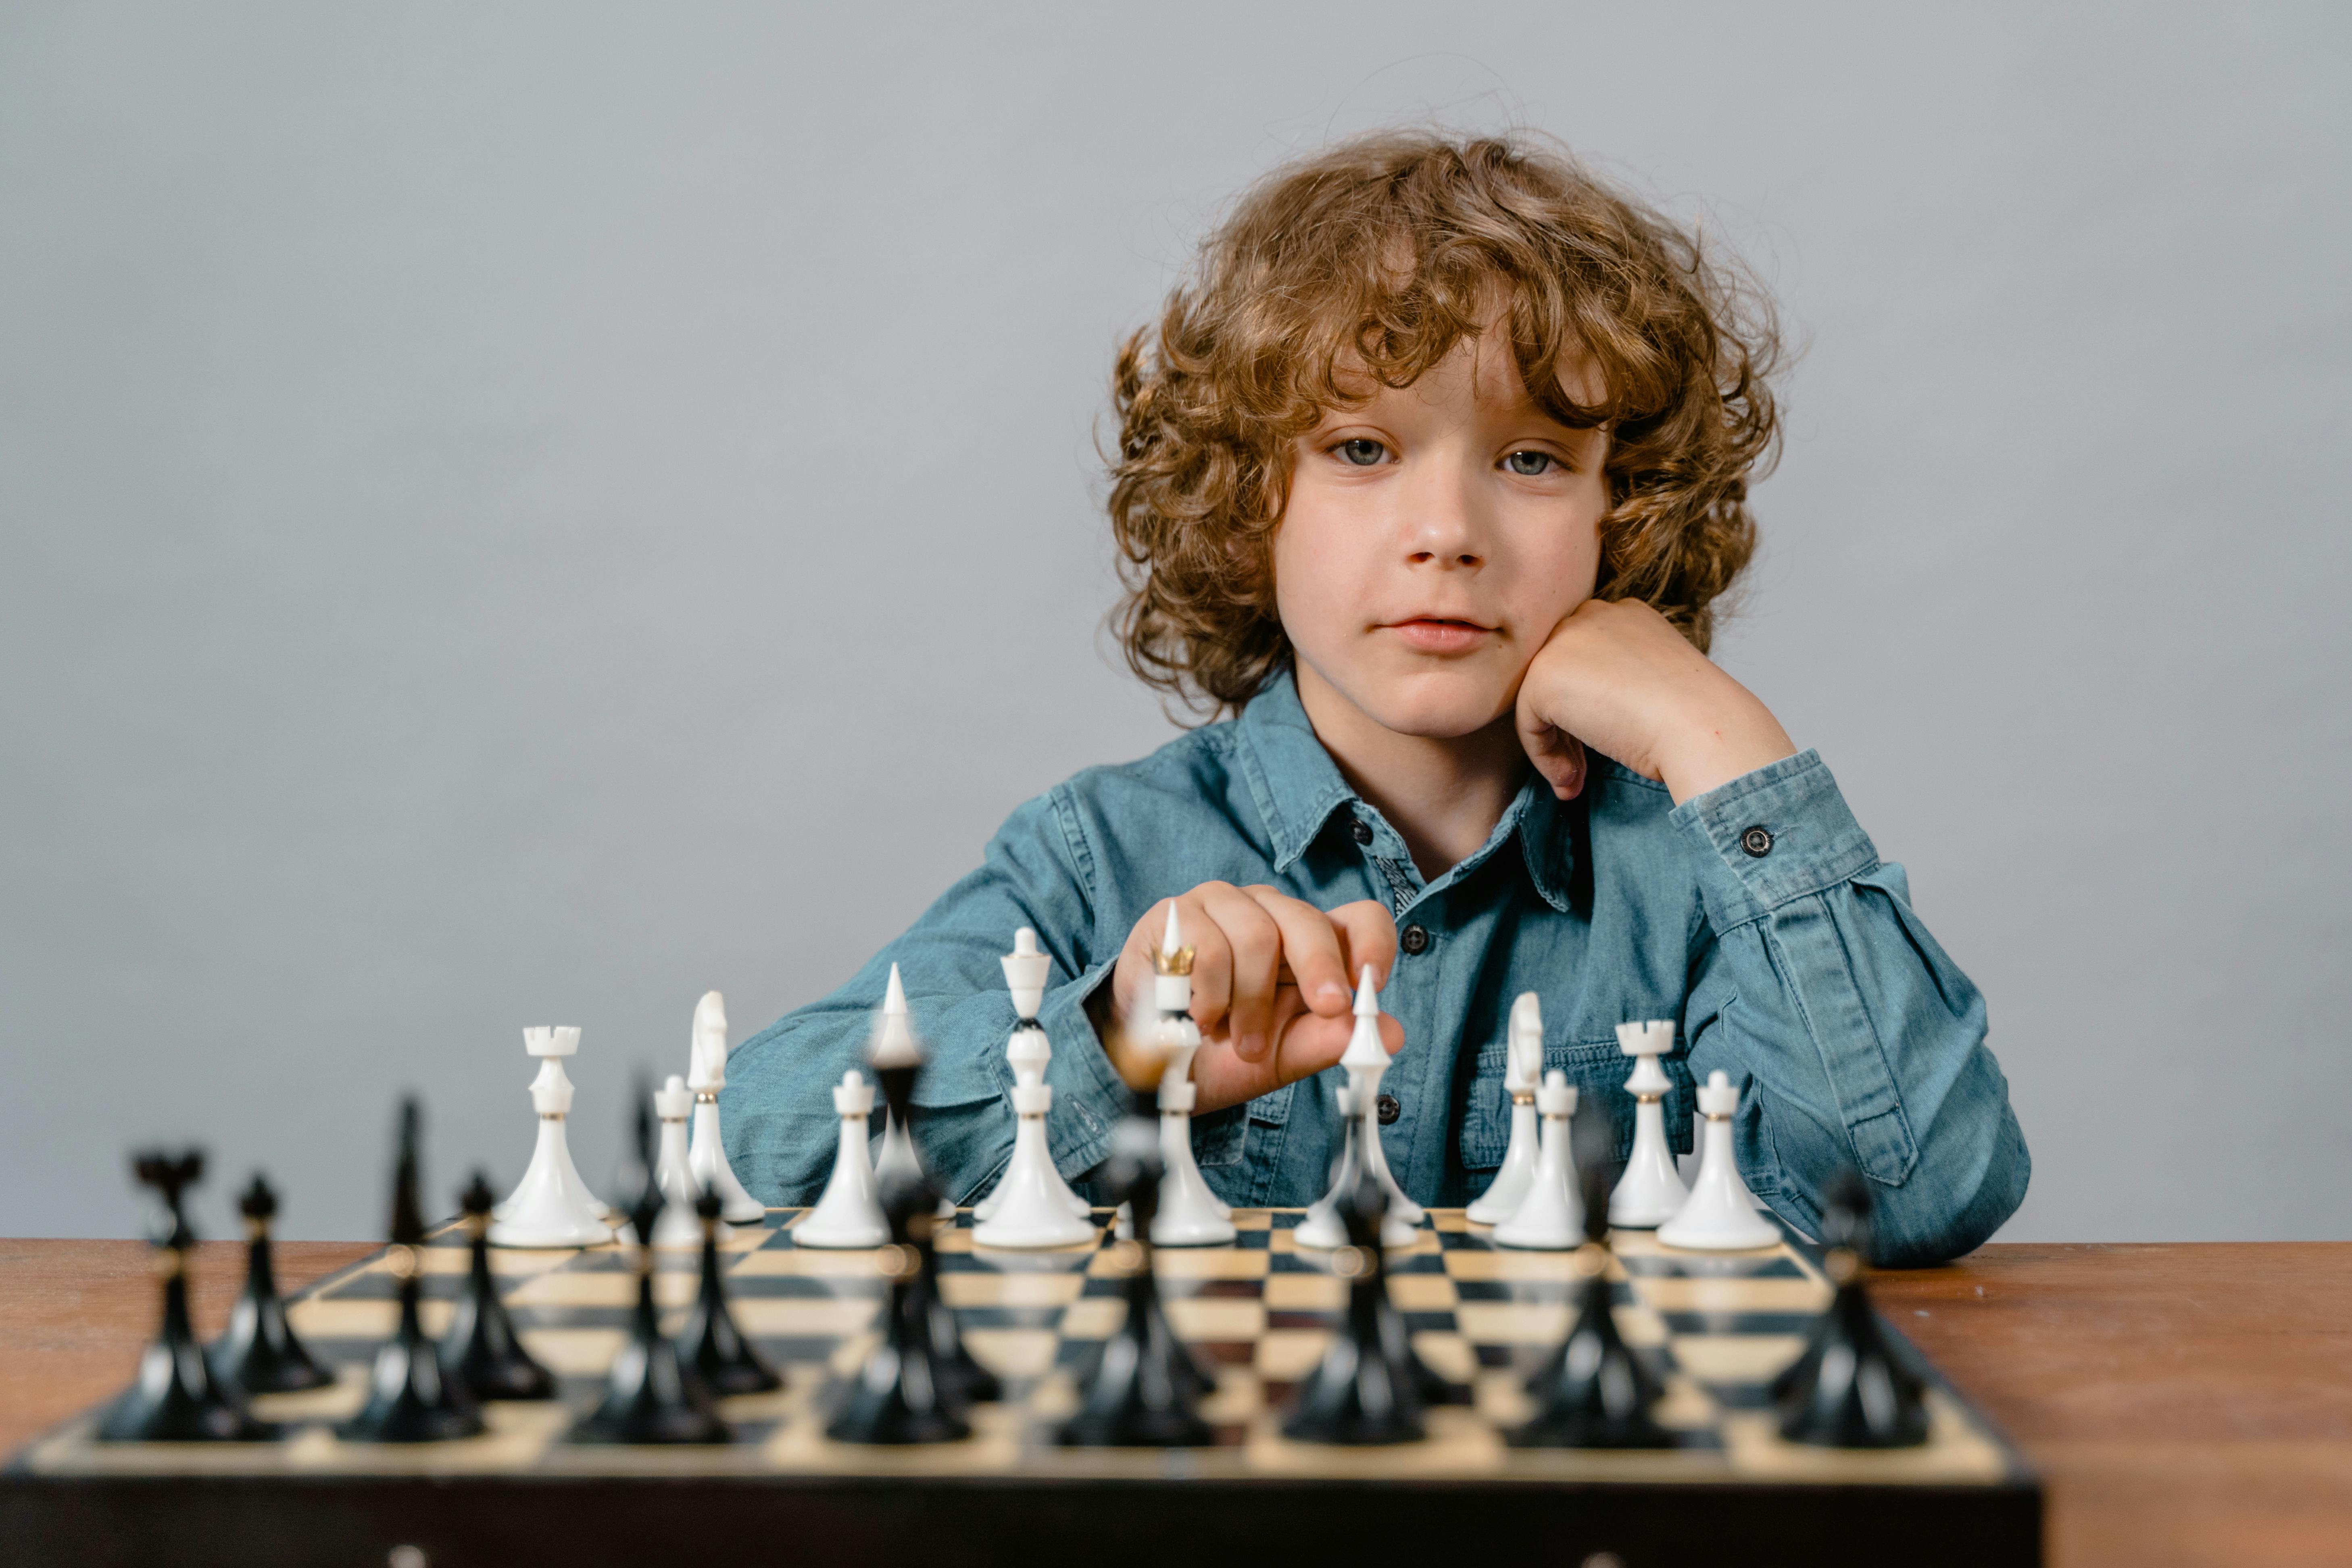 A boy looking over a chess board | Source: Pexels